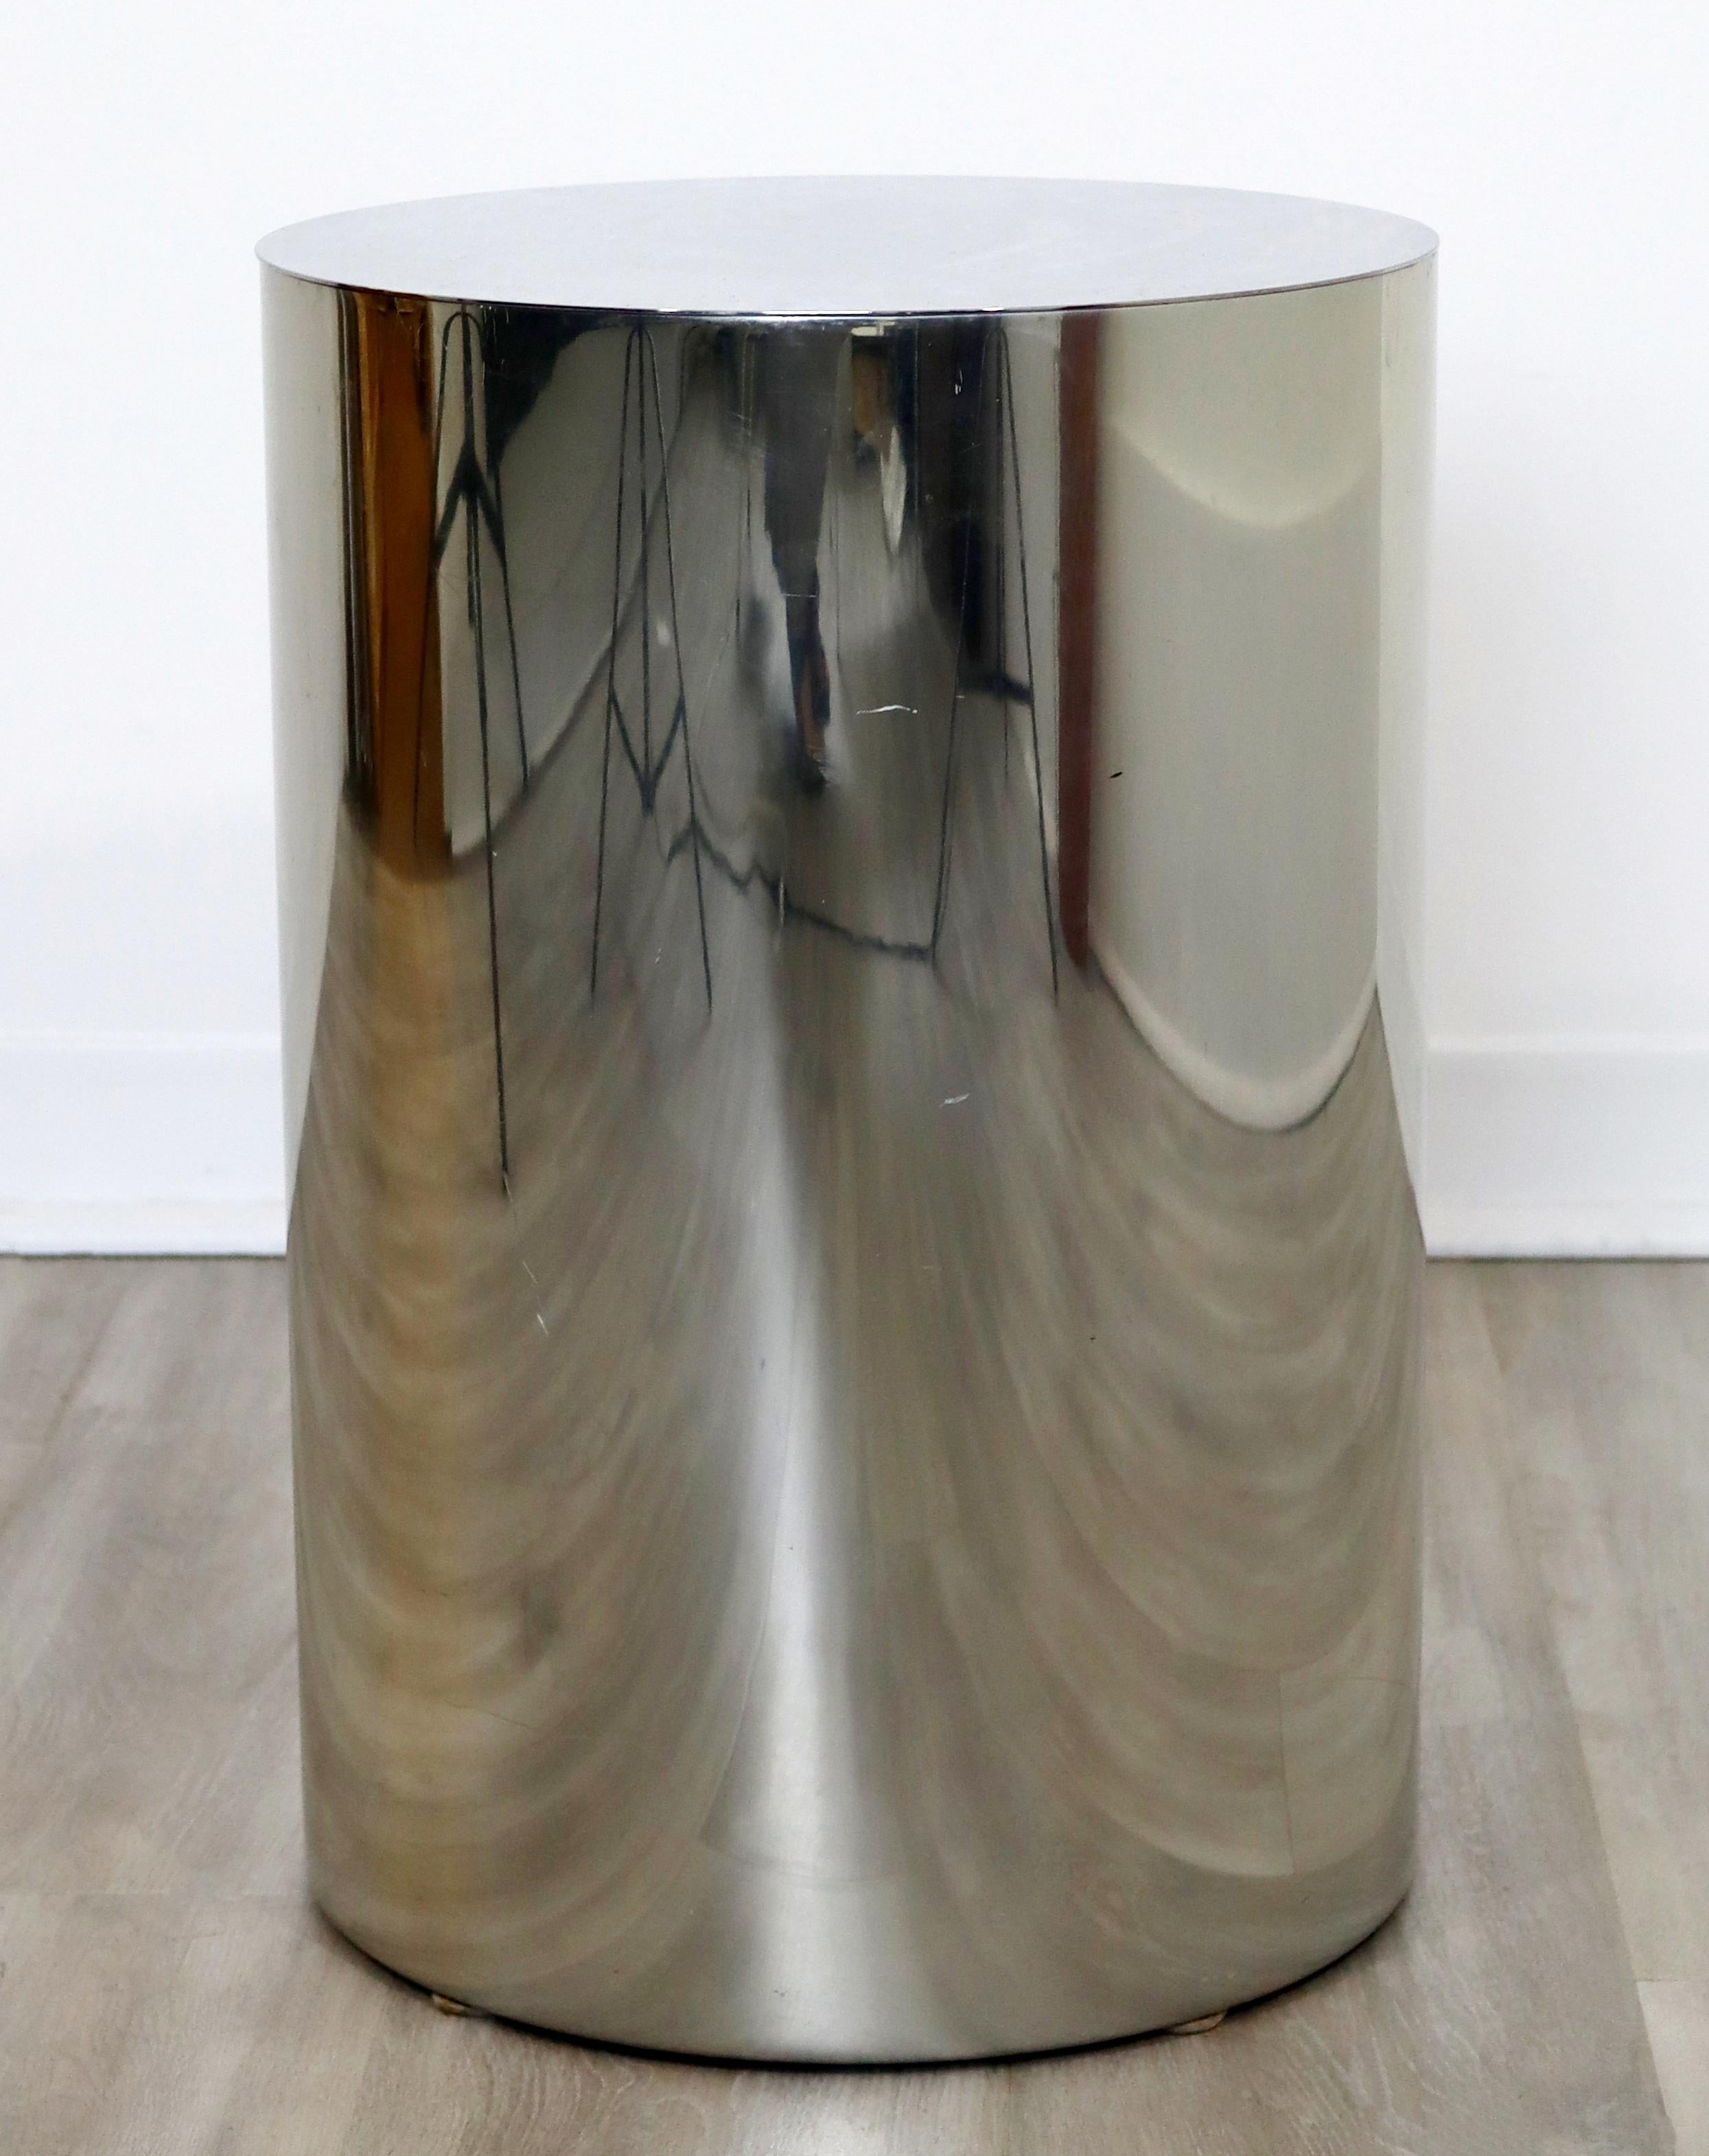 For your consideration is a fantastic, chrome, round display pedestal stand, in the style of Paul Mayan, circa the 1960s. In very good vintage condition. The dimensions are 14